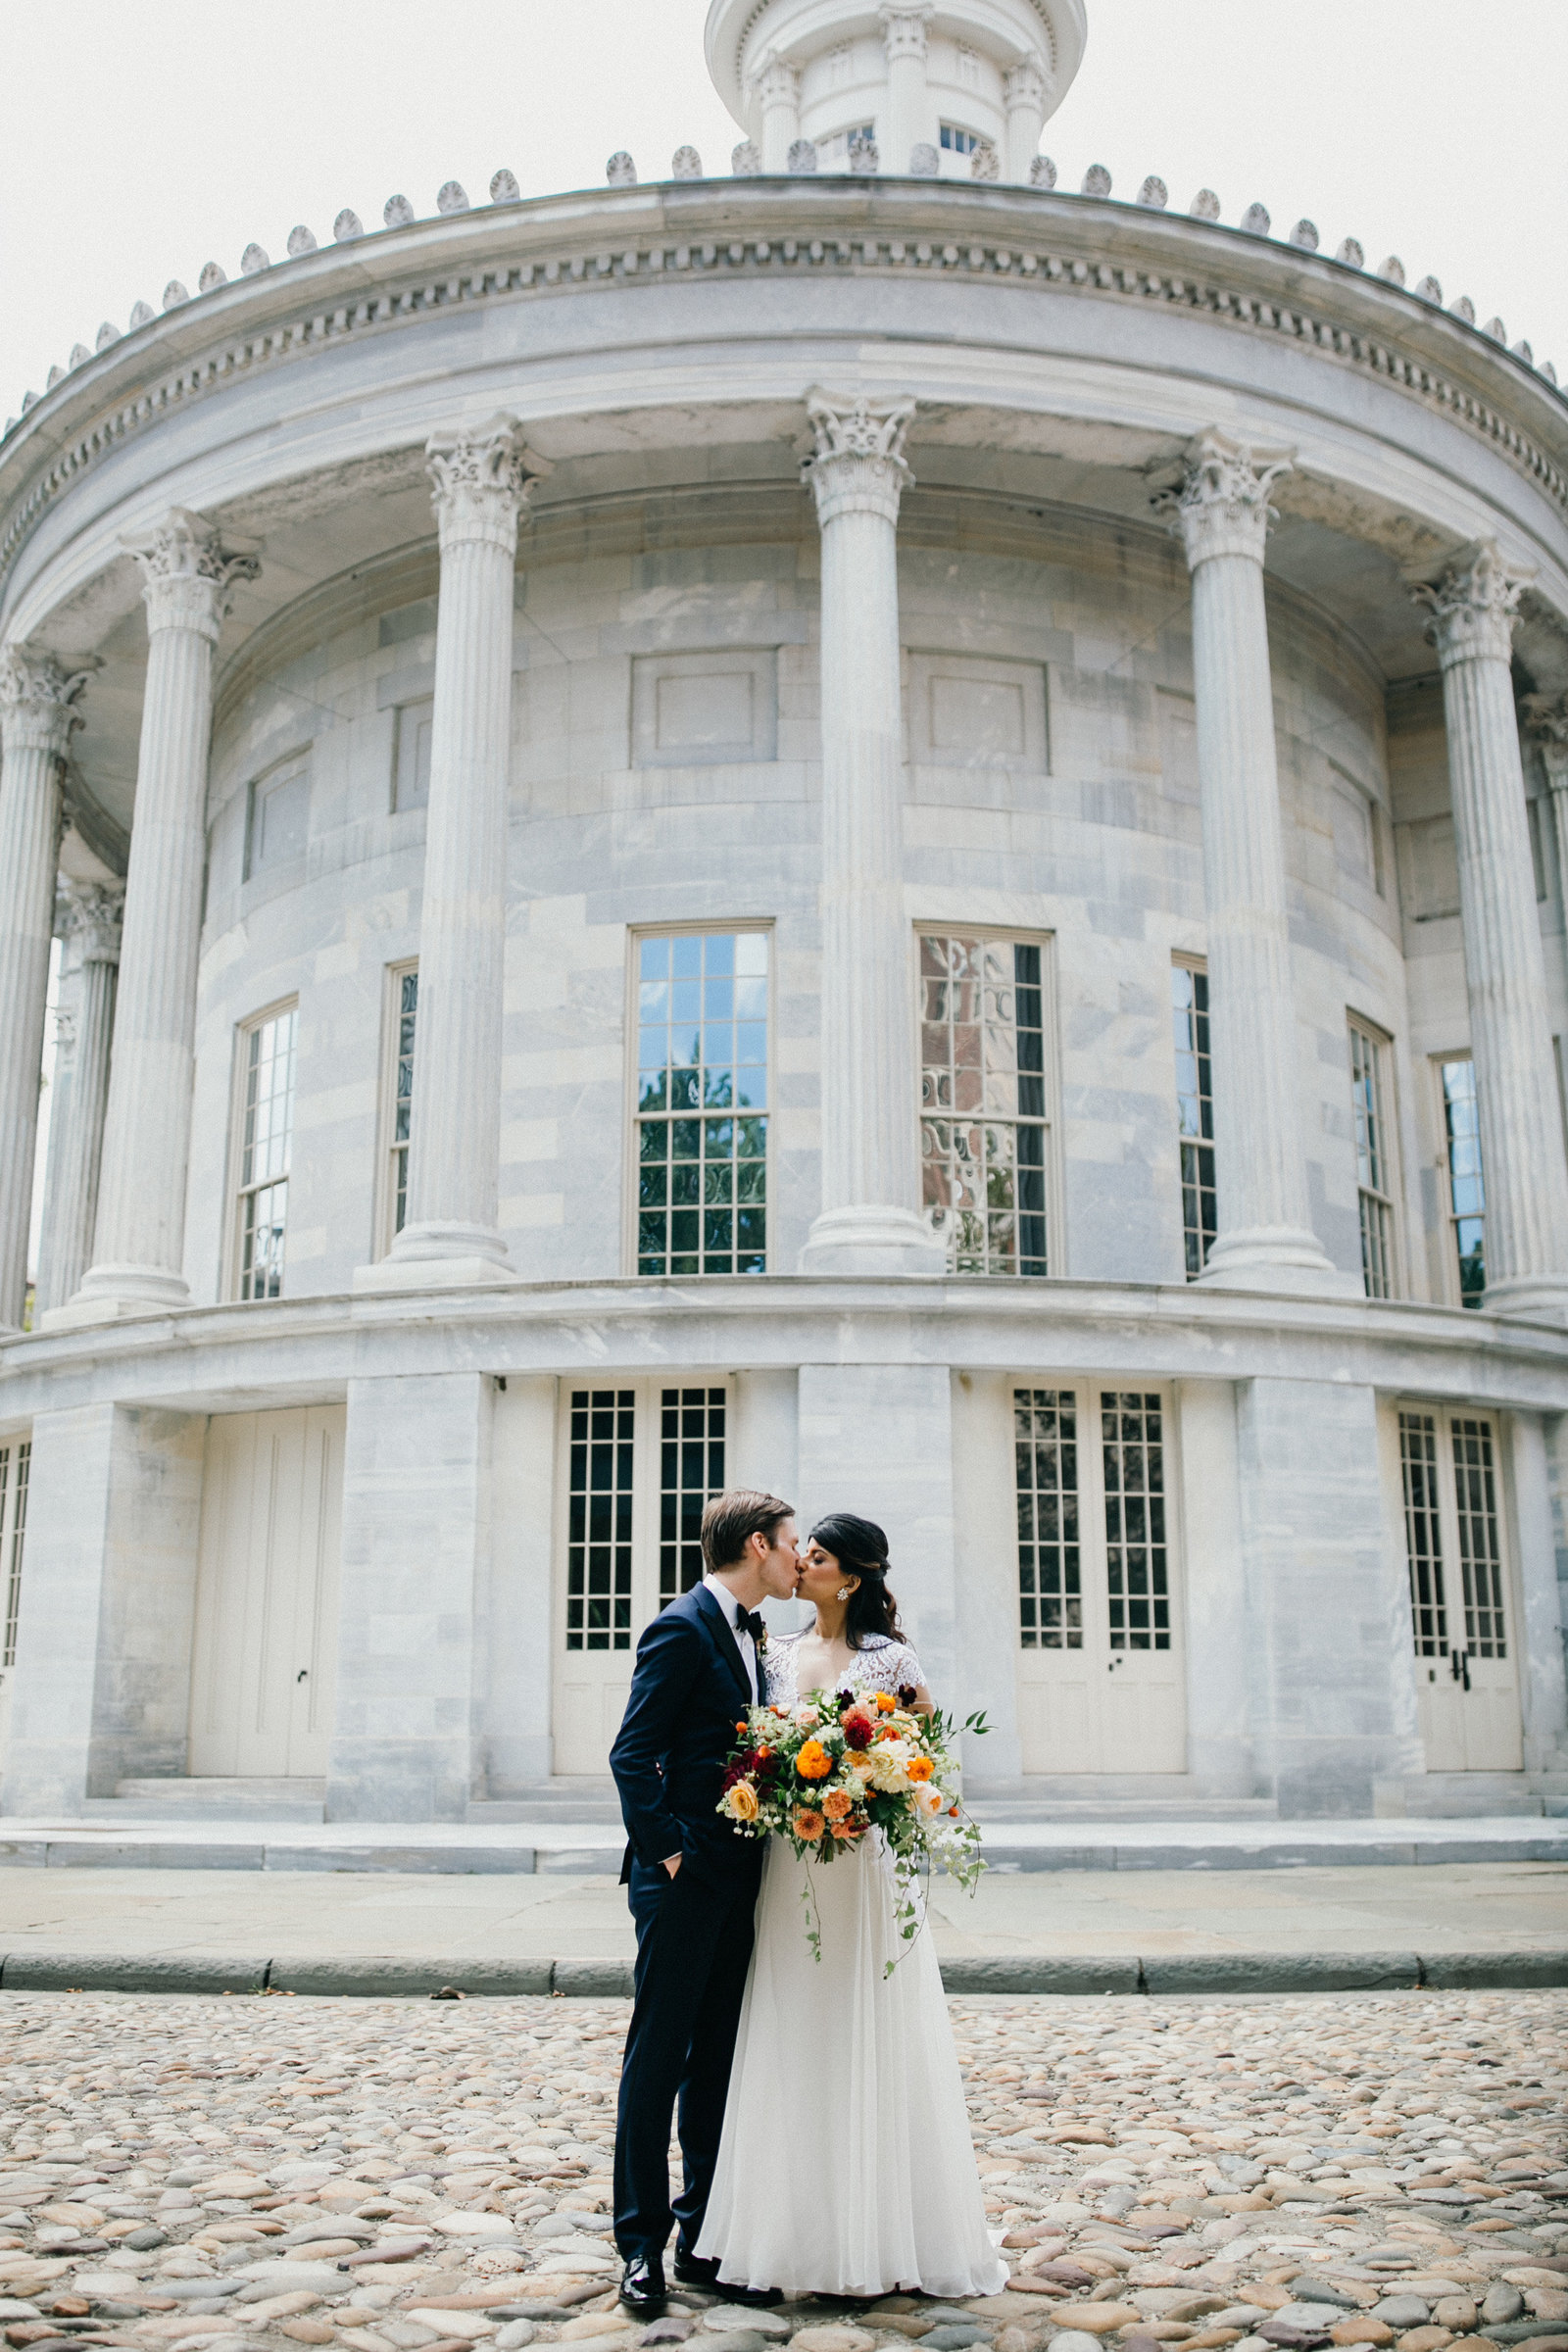 Bride and groom photographed outside this iconic historic landmark in Old City, Philadelphia.